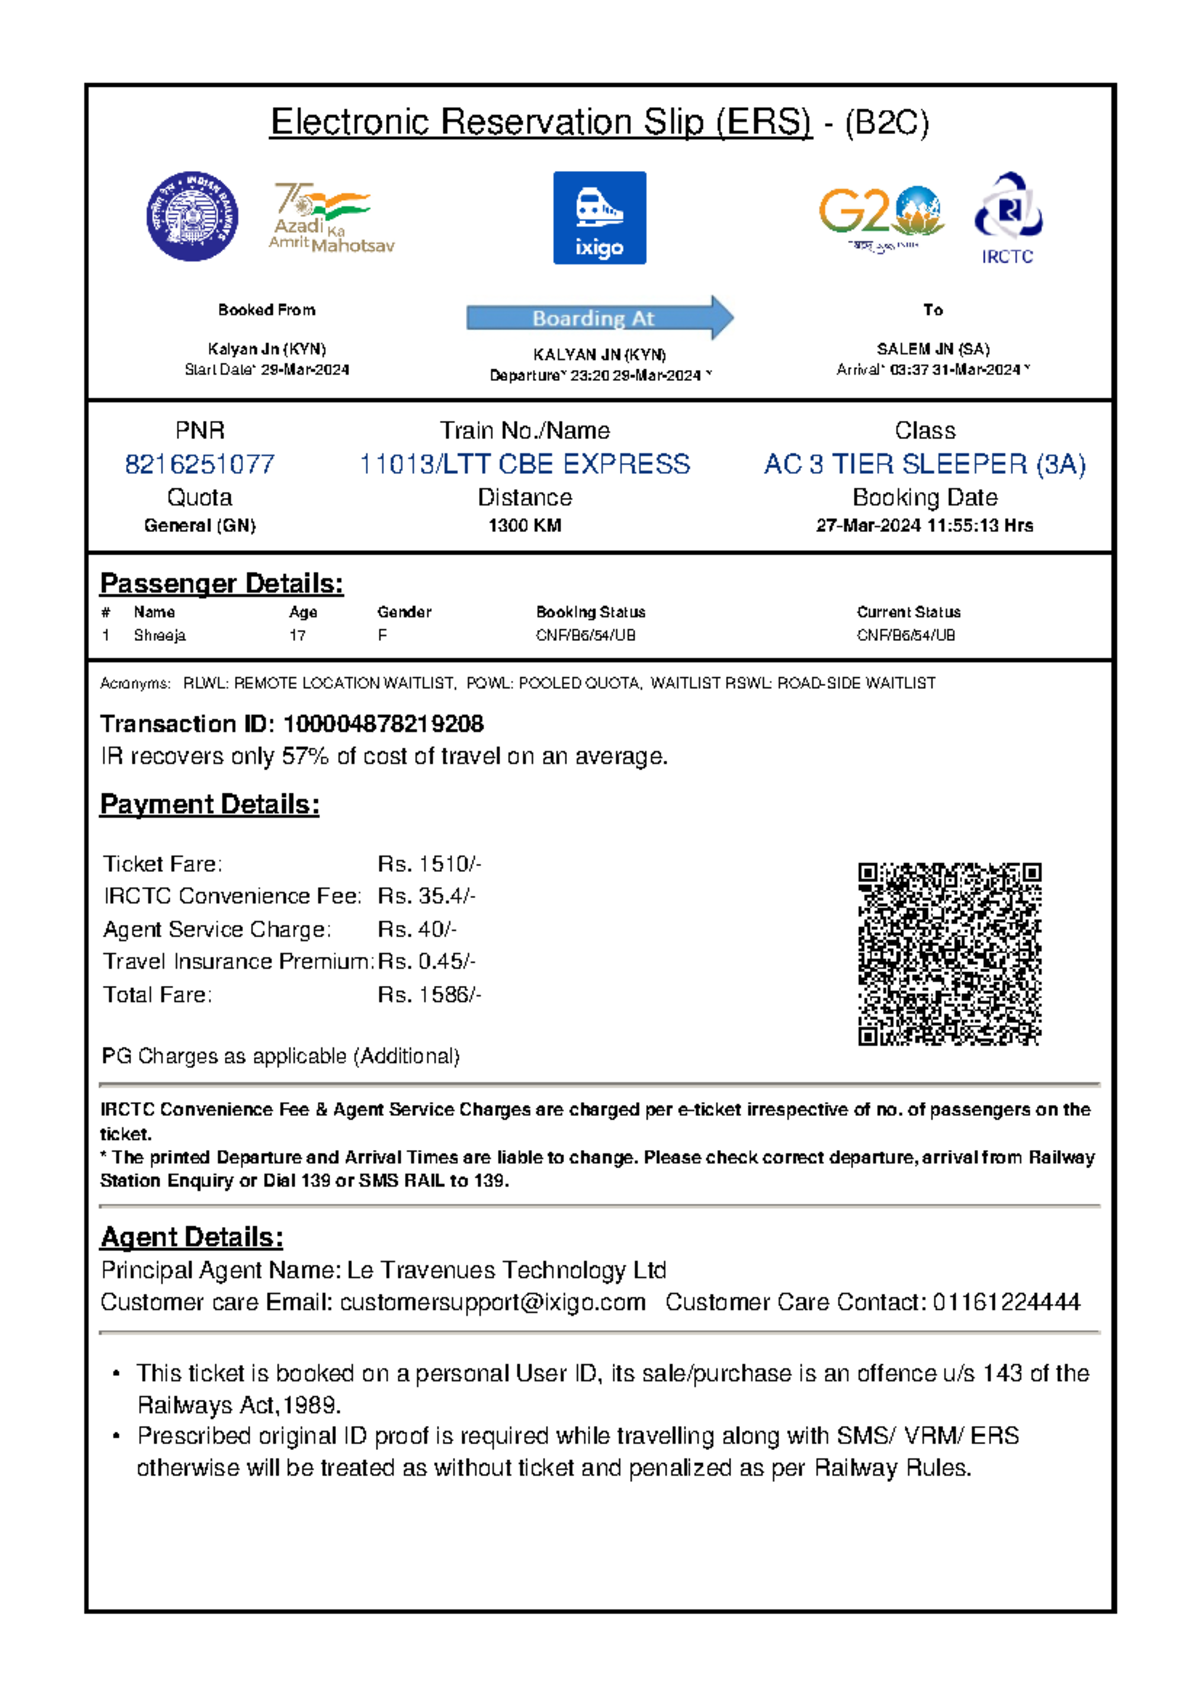 8216251077 - Electronic Reservation Slip (ERS) - (B2C) Booked From 